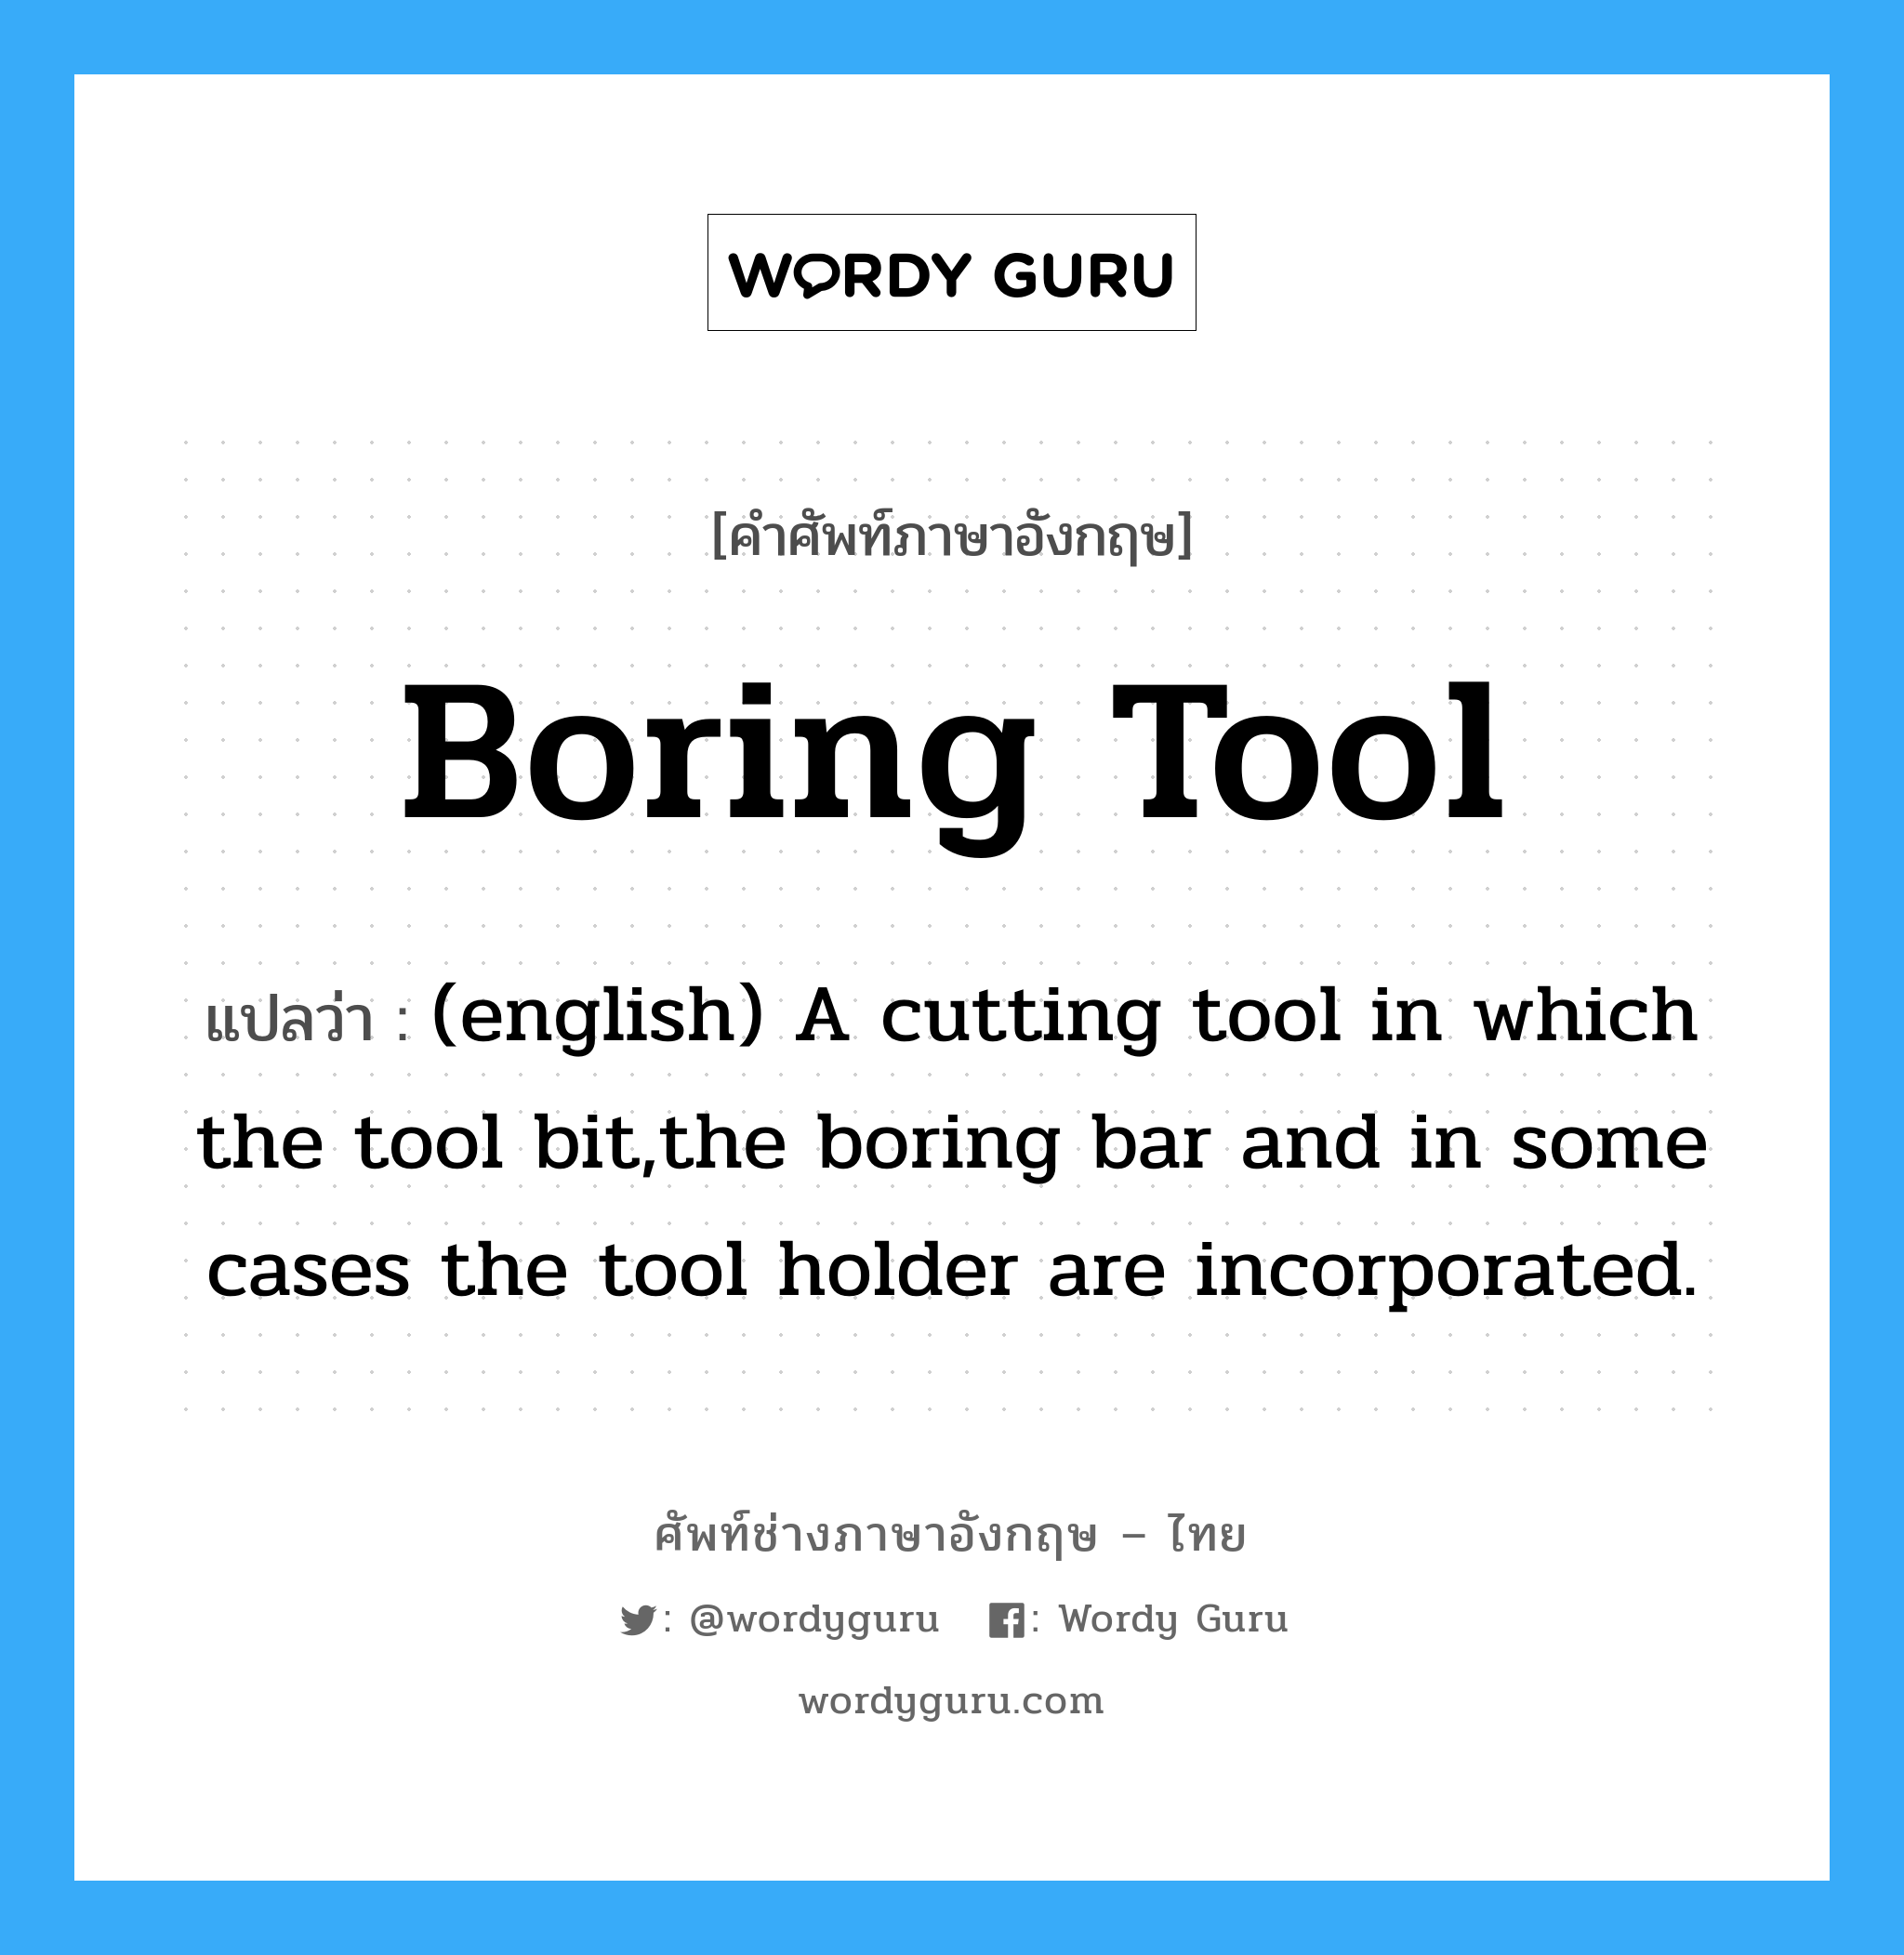 Boring Tool แปลว่า?, คำศัพท์ช่างภาษาอังกฤษ - ไทย Boring Tool คำศัพท์ภาษาอังกฤษ Boring Tool แปลว่า (english) A cutting tool in which the tool bit,the boring bar and in some cases the tool holder are incorporated.